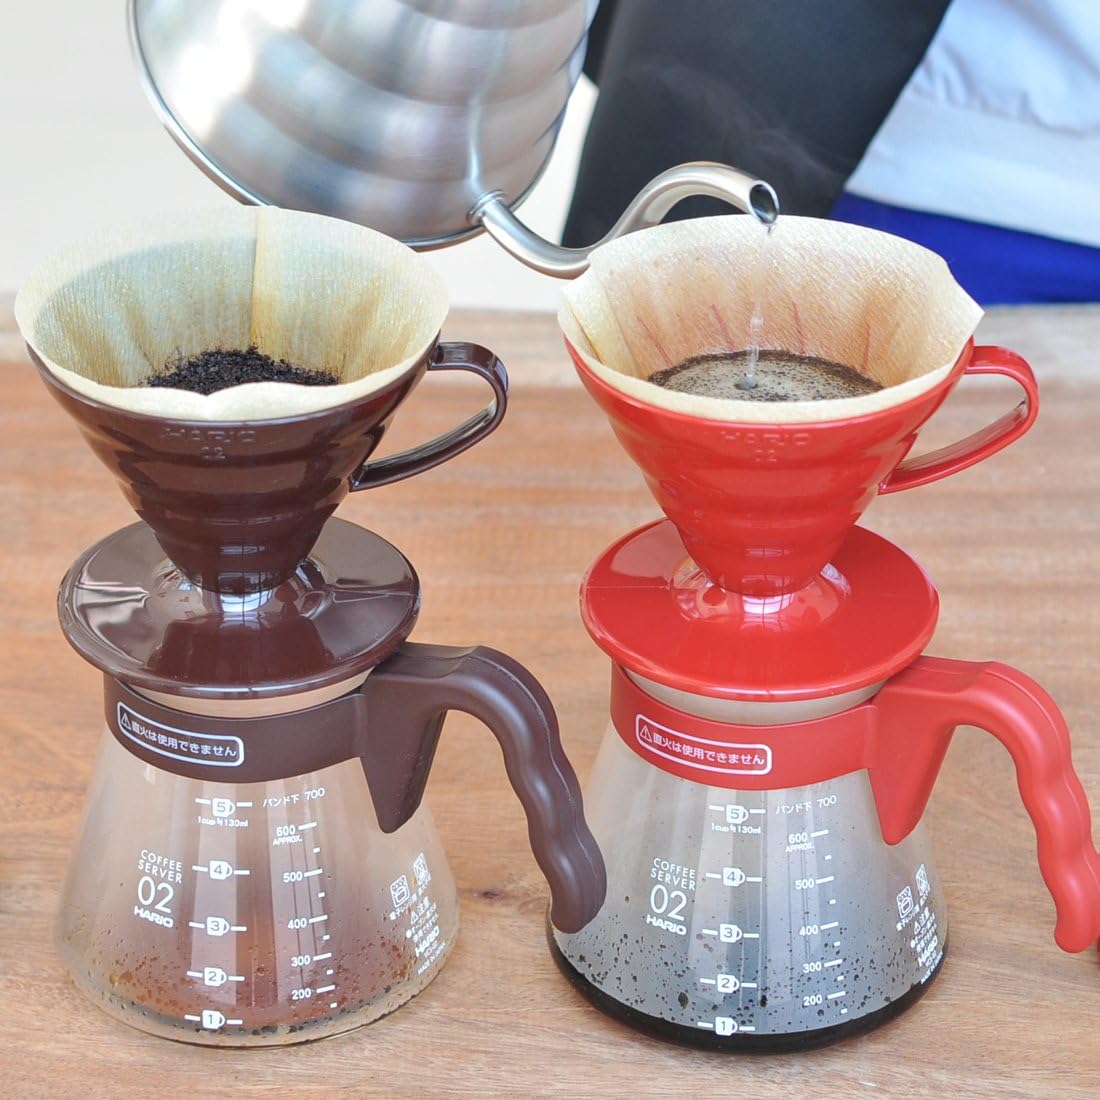 Hario V60 Pour Over Starter Set with Dripper, Glass Server, Scoop and Filters, Size 02, Brown - SQN station